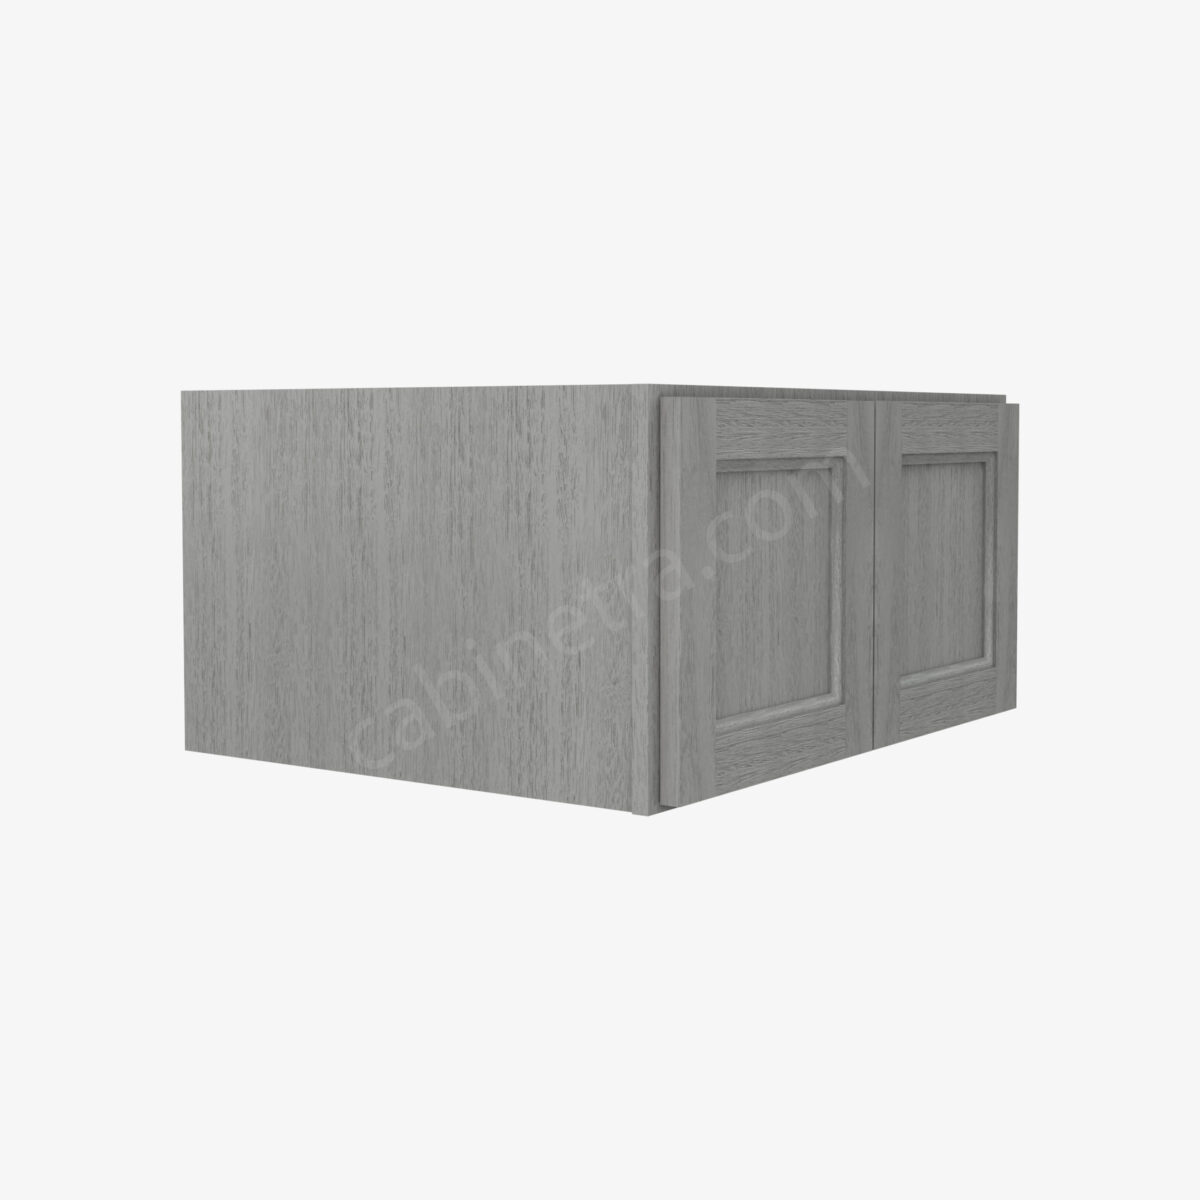 TG W301524B 4 Forevermark Midtown Grey Cabinetra scaled